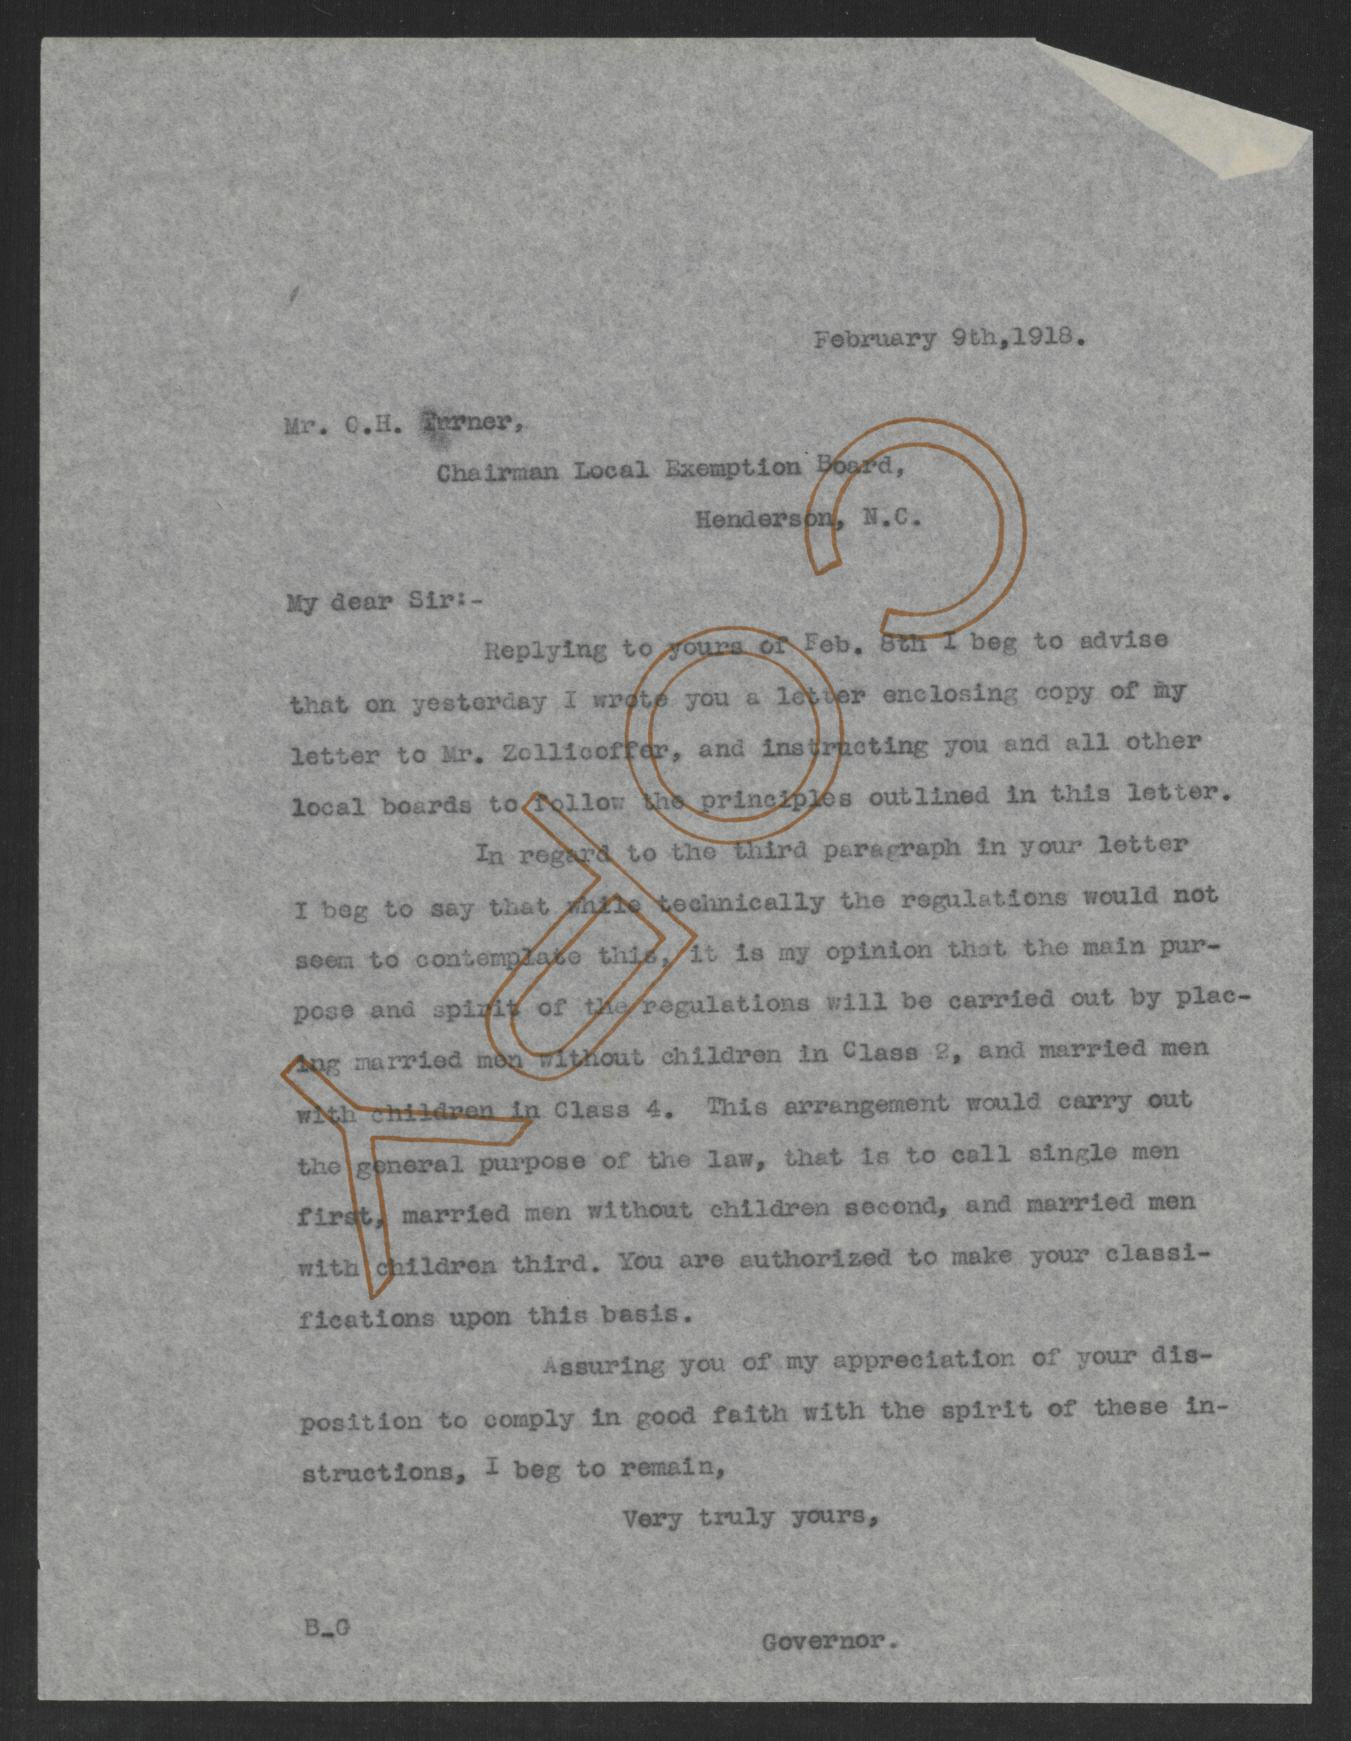 Letter from Thomas W. Bickett to Charles H. Turner, February 9, 1918